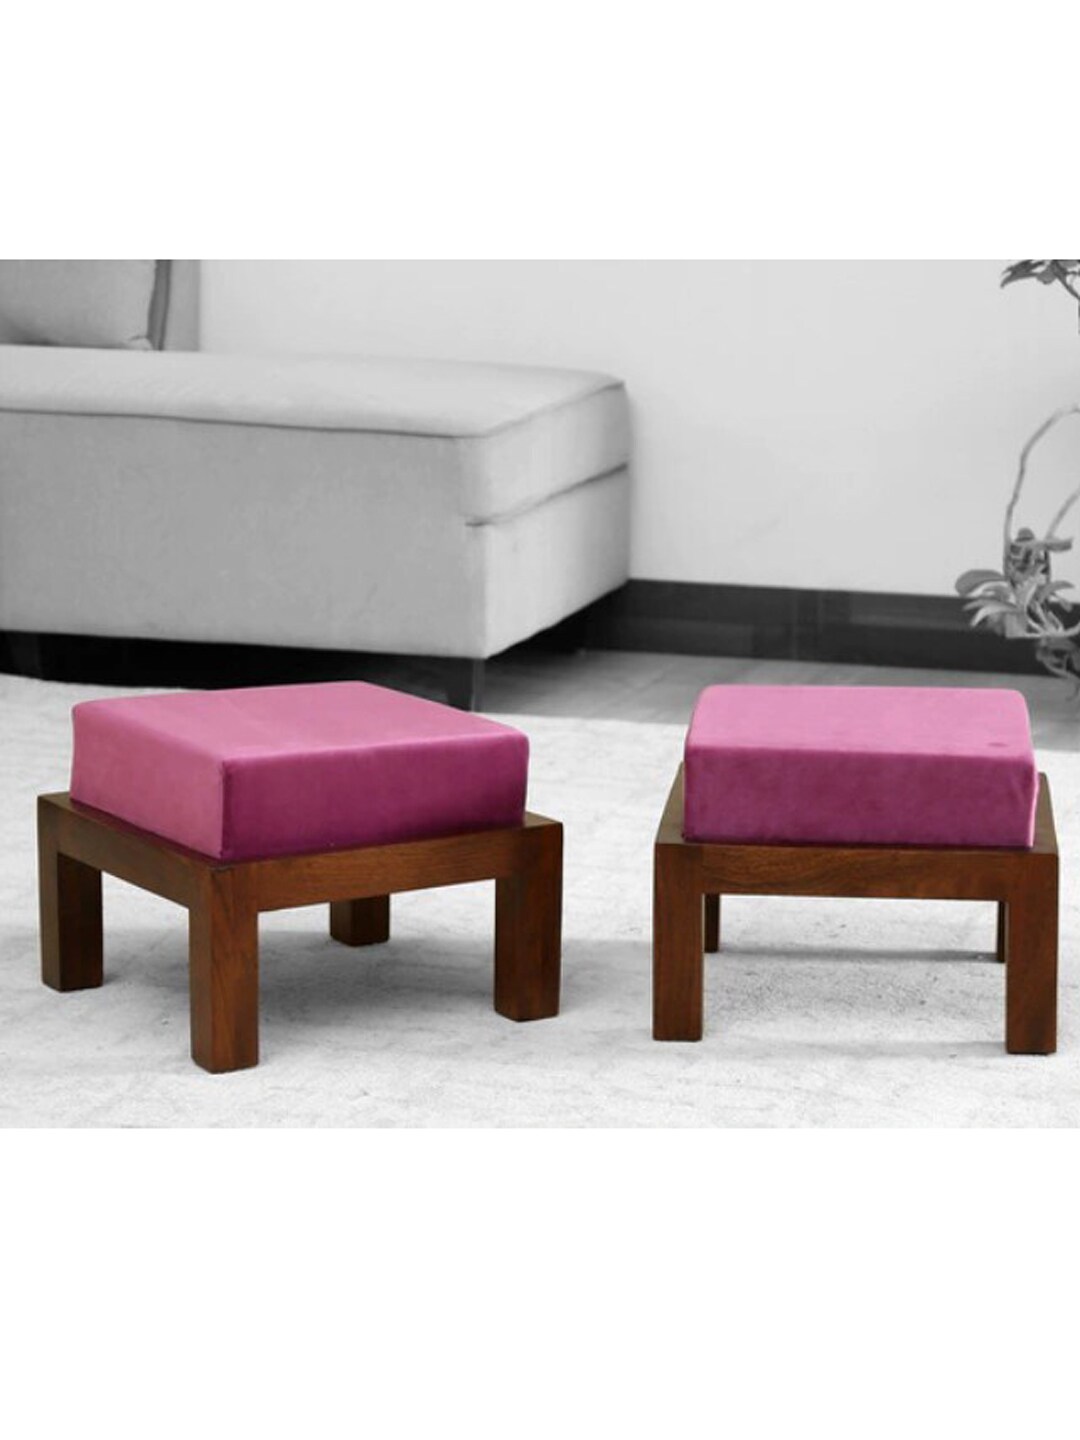 GLOBALLY INDIAN Set of 2 Purple & Brown Low-Heighted Acacia Wood Stools Price in India